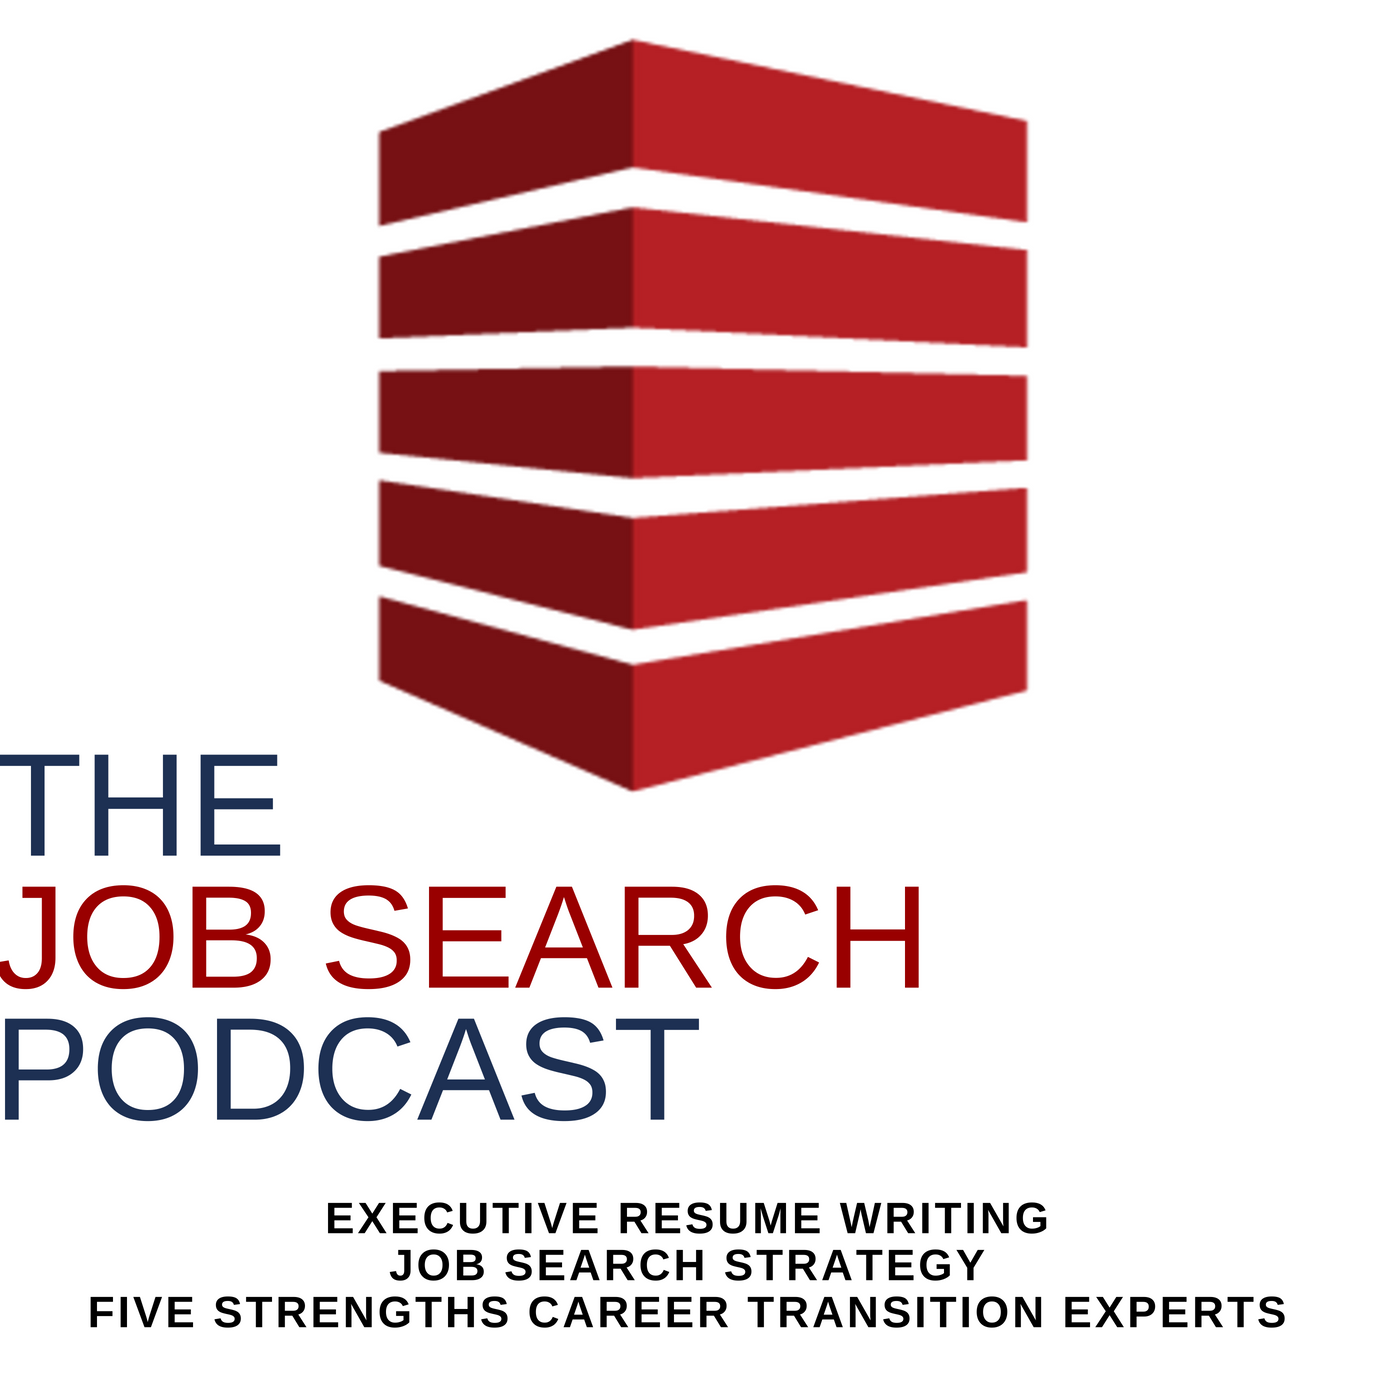 Cut the Clutter in Your Executive Resume | The Job Search Podcast